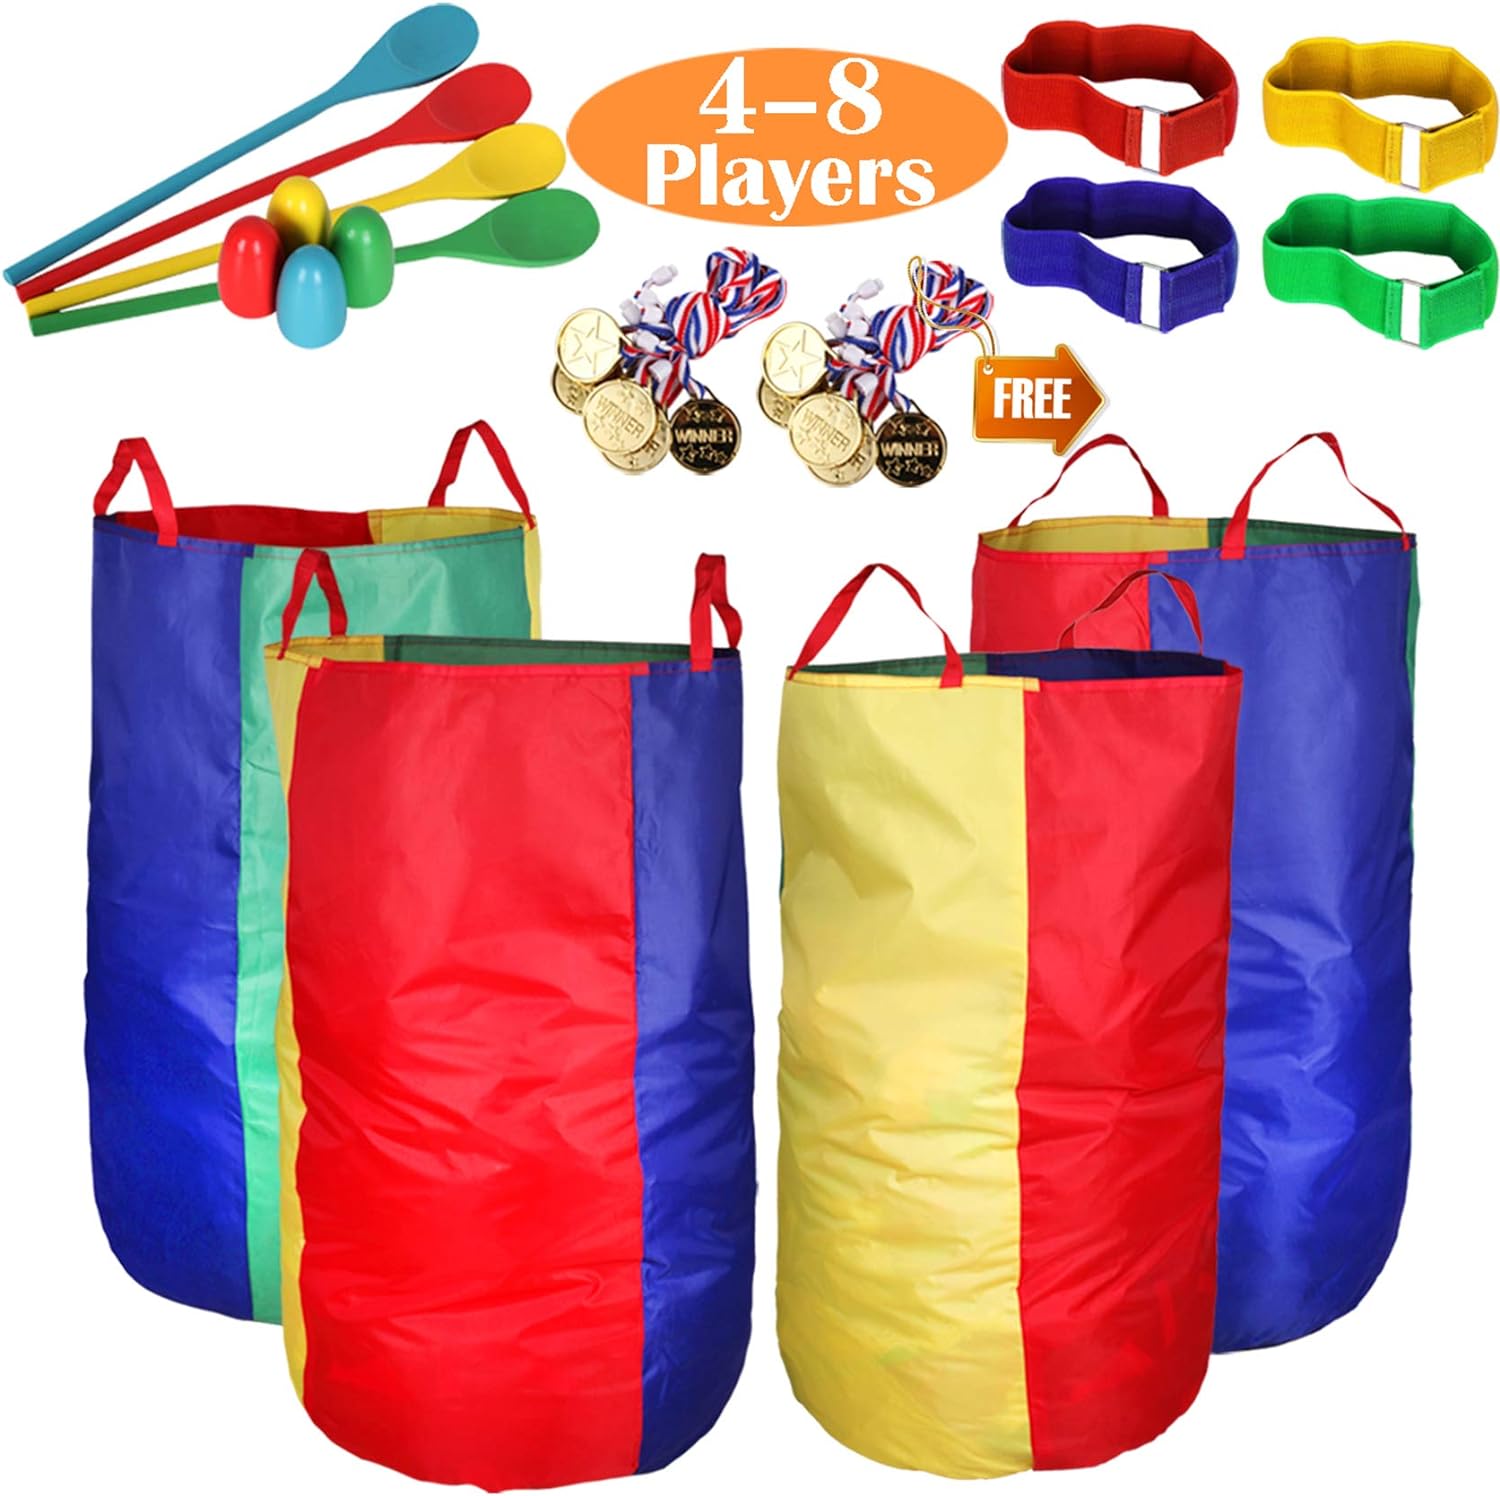 CWLAKON Sports Day Kit Outdoor Games for Kids Adults Family